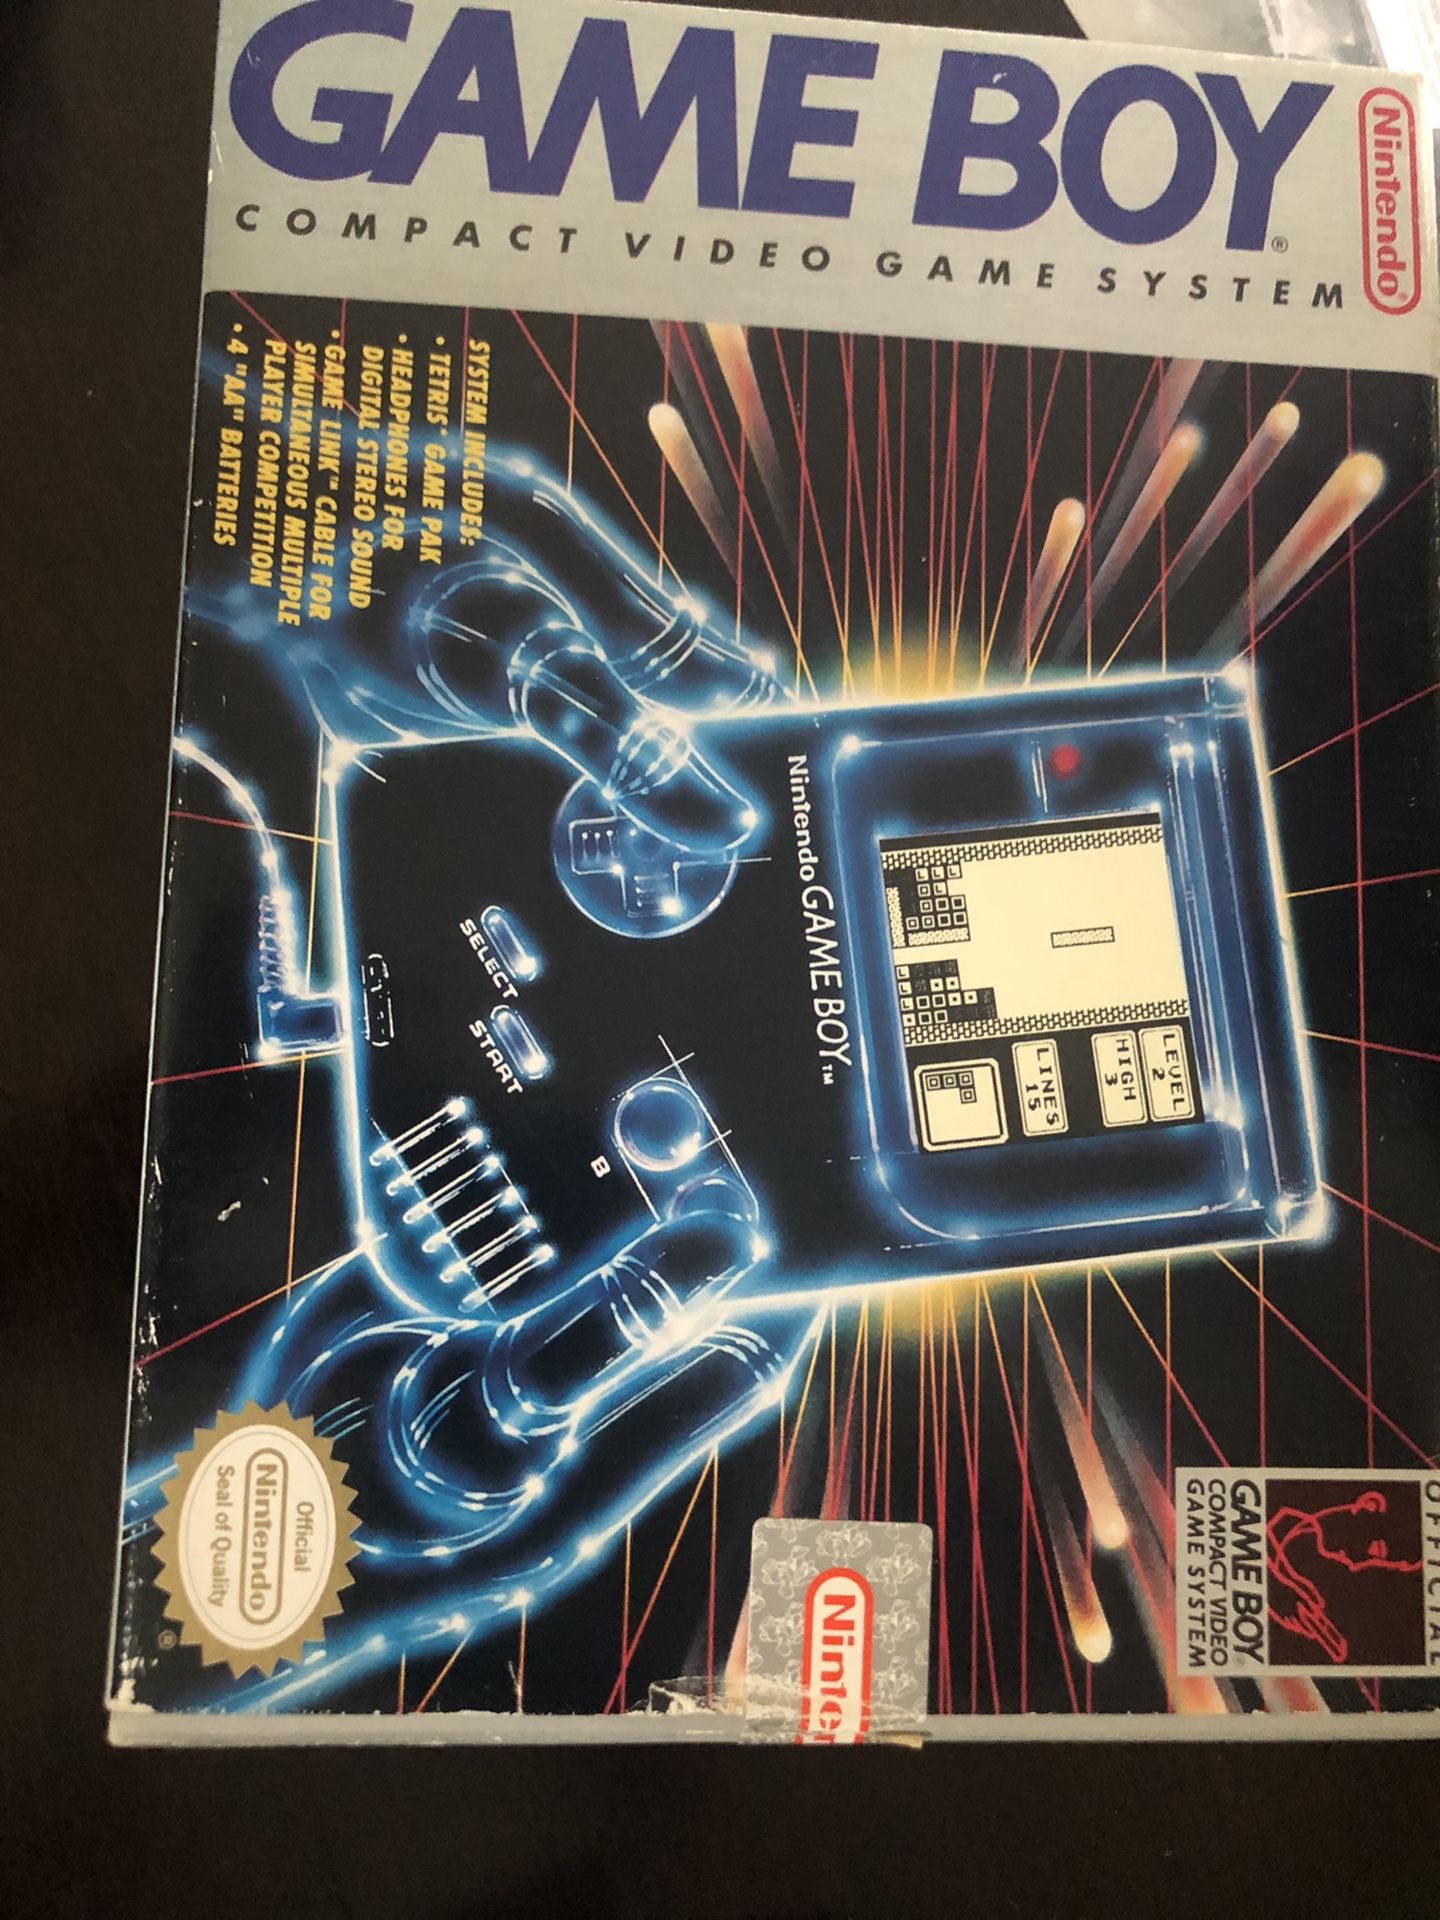 Gameboy with original box and accessories. Also gameboy color and pocket